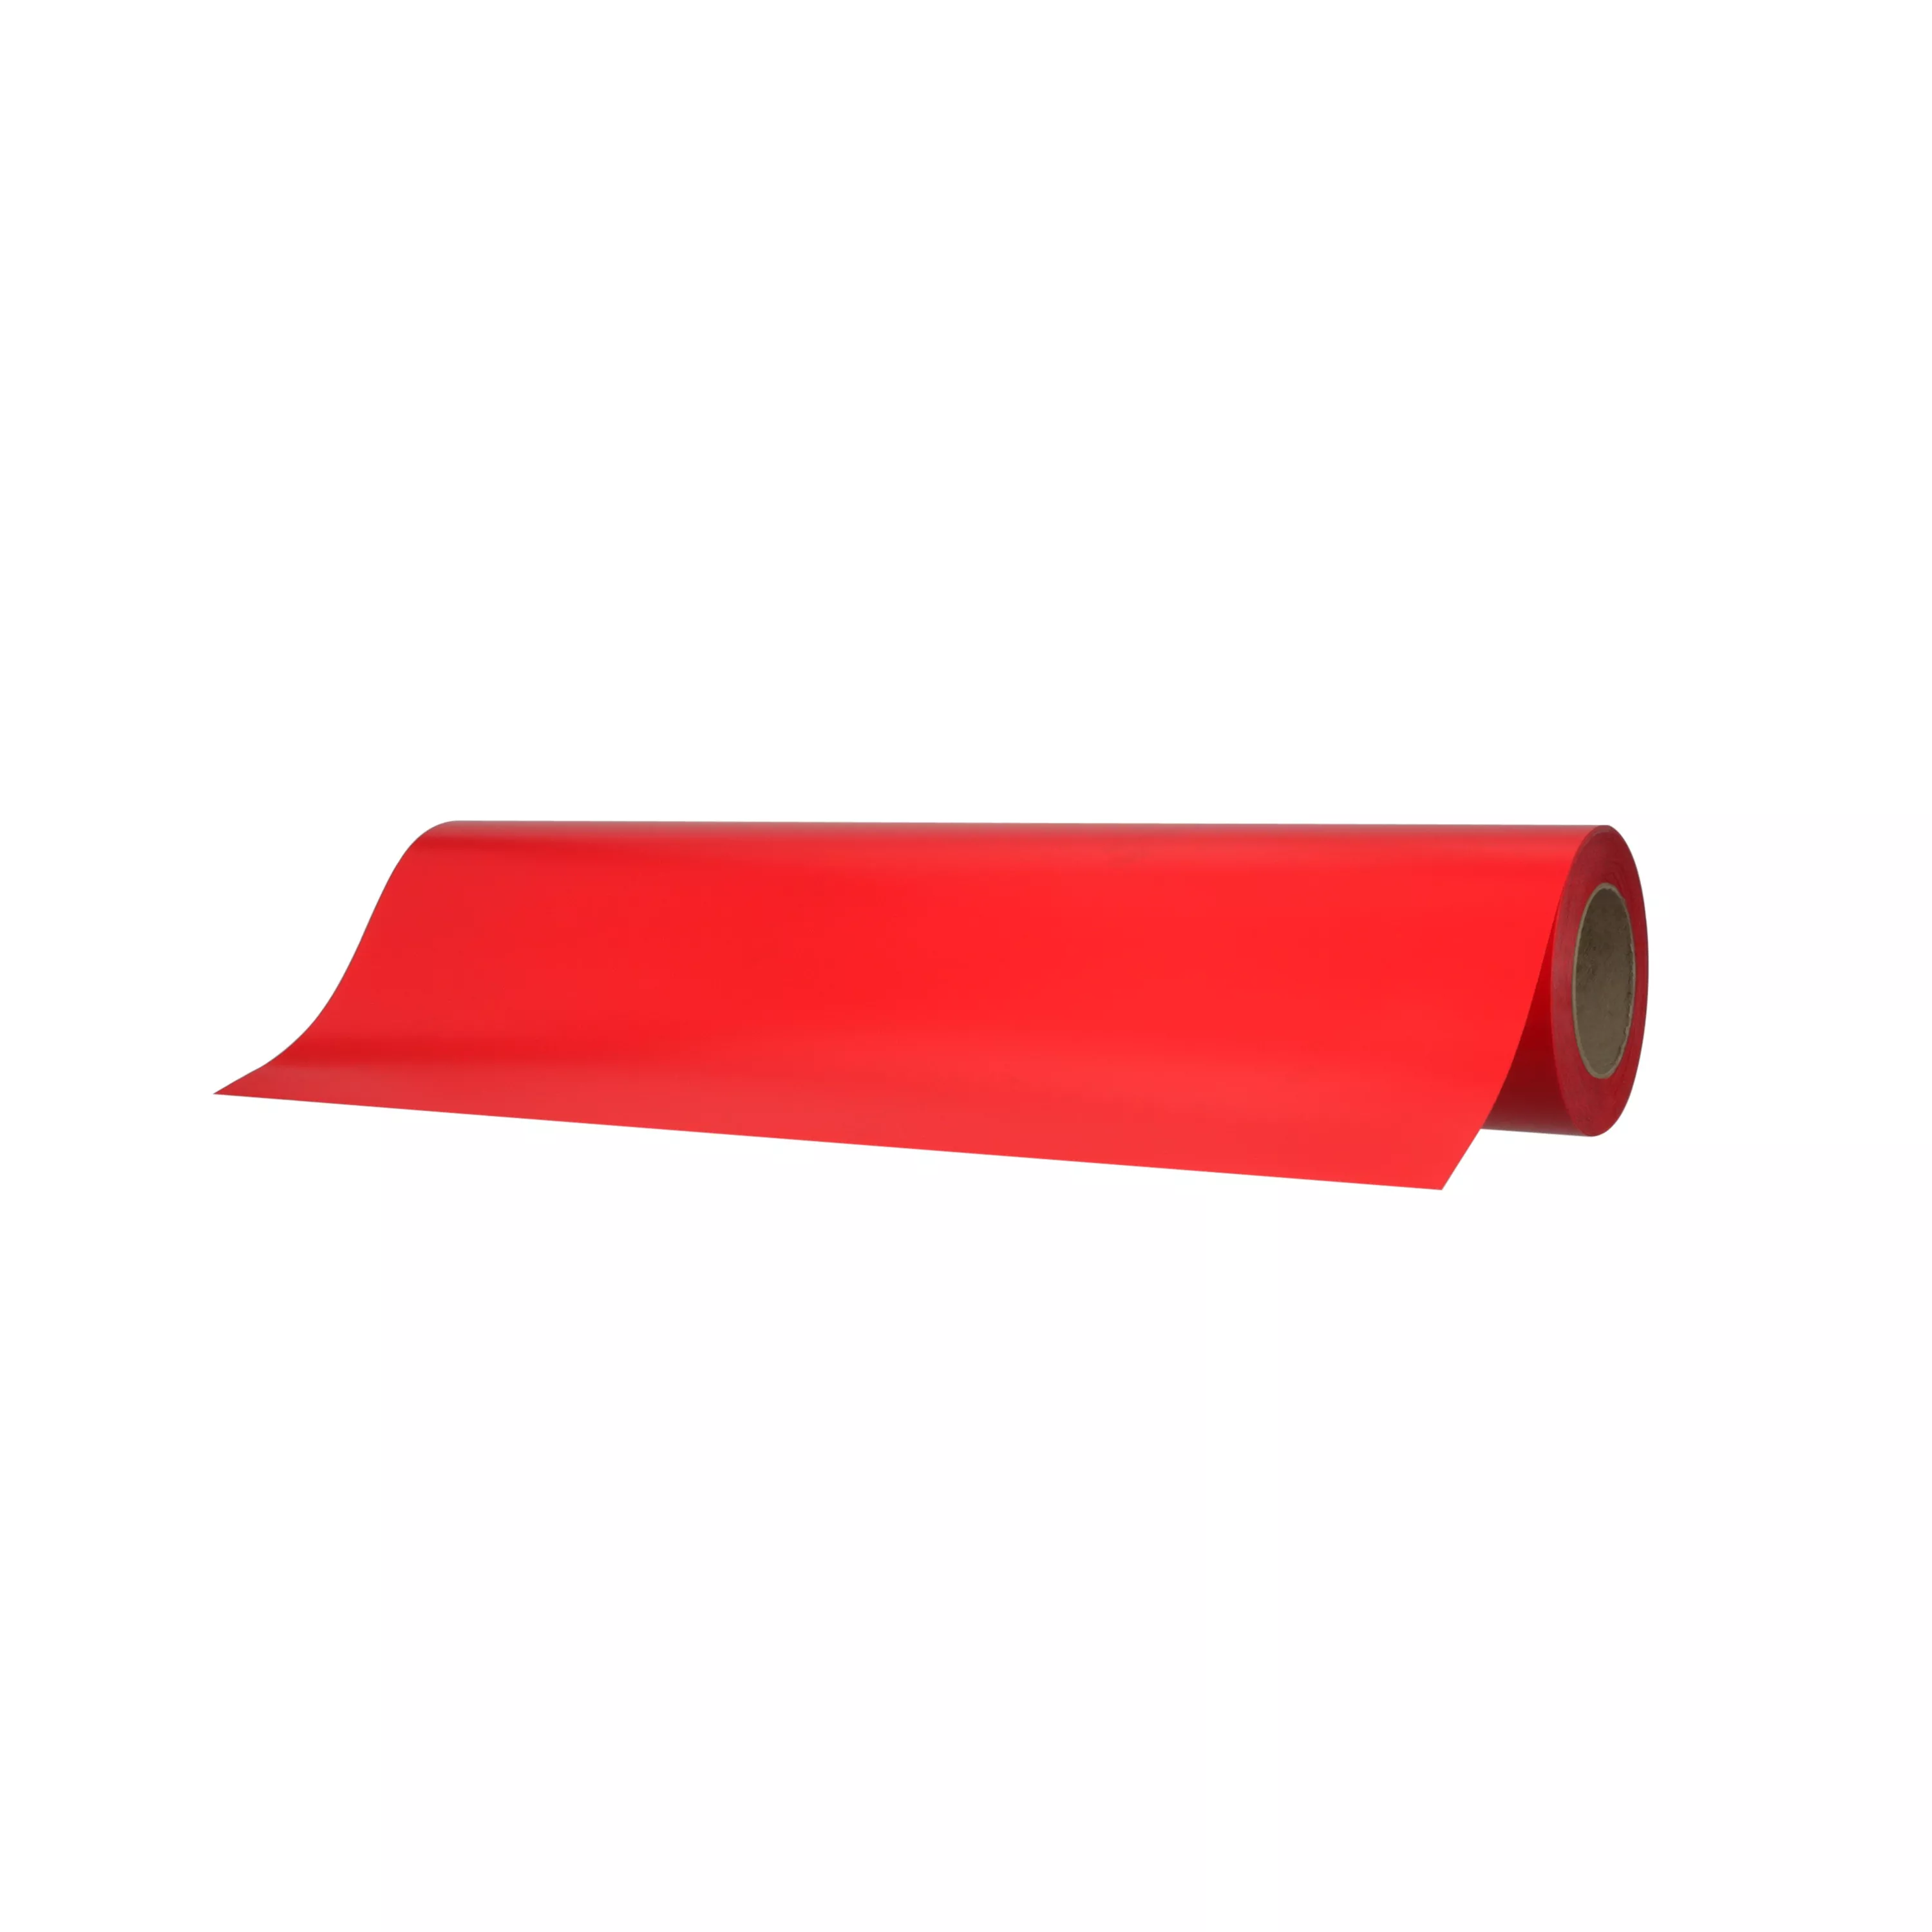 3M™ Scotchcal™ Translucent Graphic Film 3630-163, Scarlet, 48 in x 50
yd, 1 Roll/Case